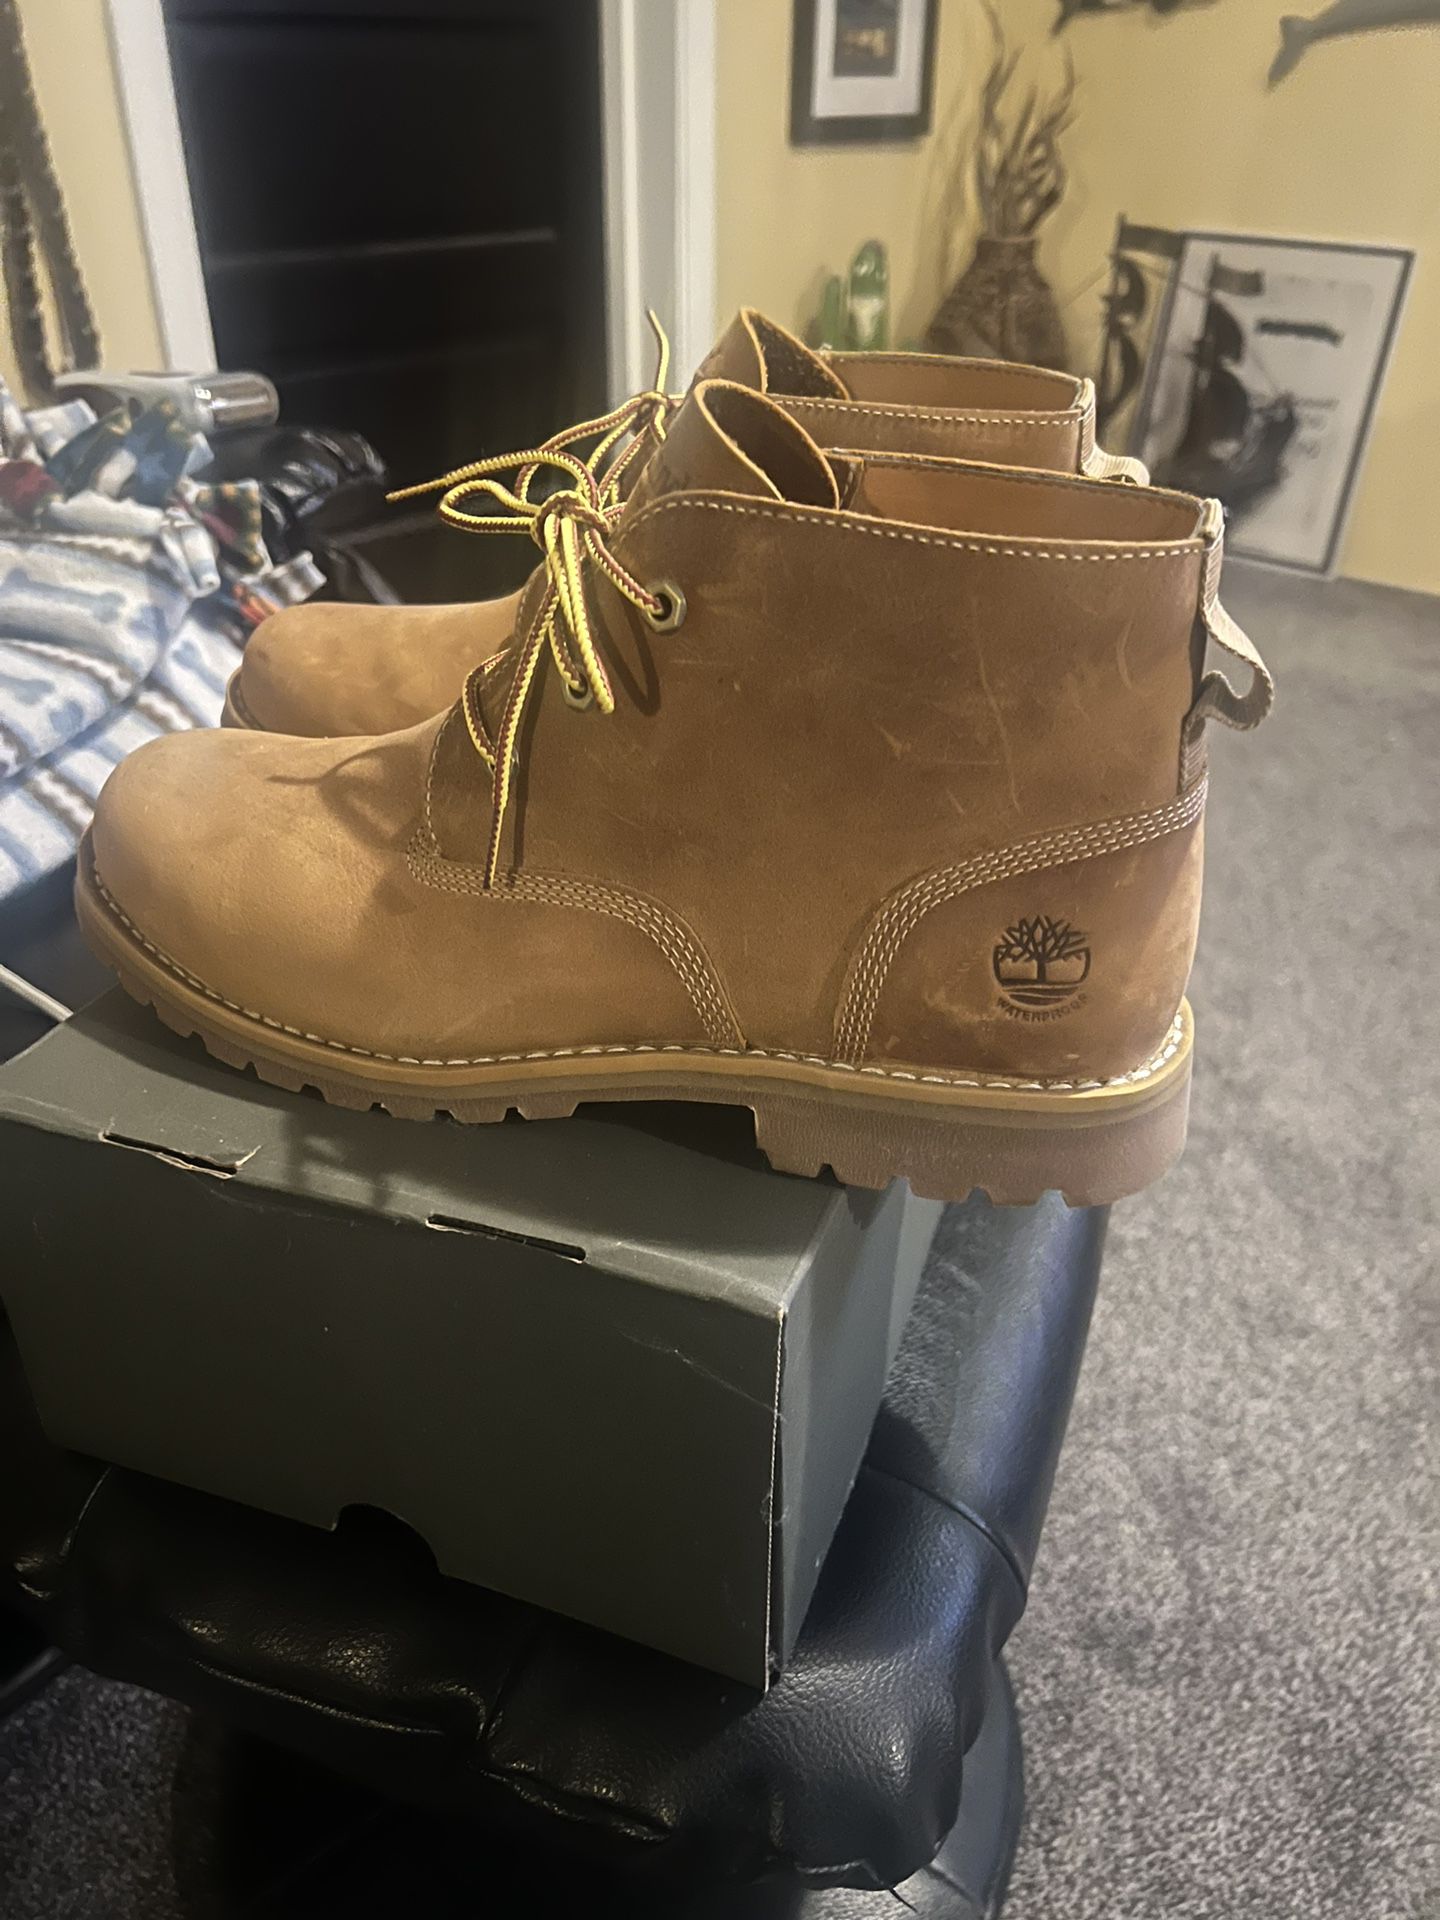 vogel olifant Jane Austen Men's Timberland Wheat Chukka Boot Waterproof Size 11 - Excellent Condition  for Sale in Portland, OR - OfferUp